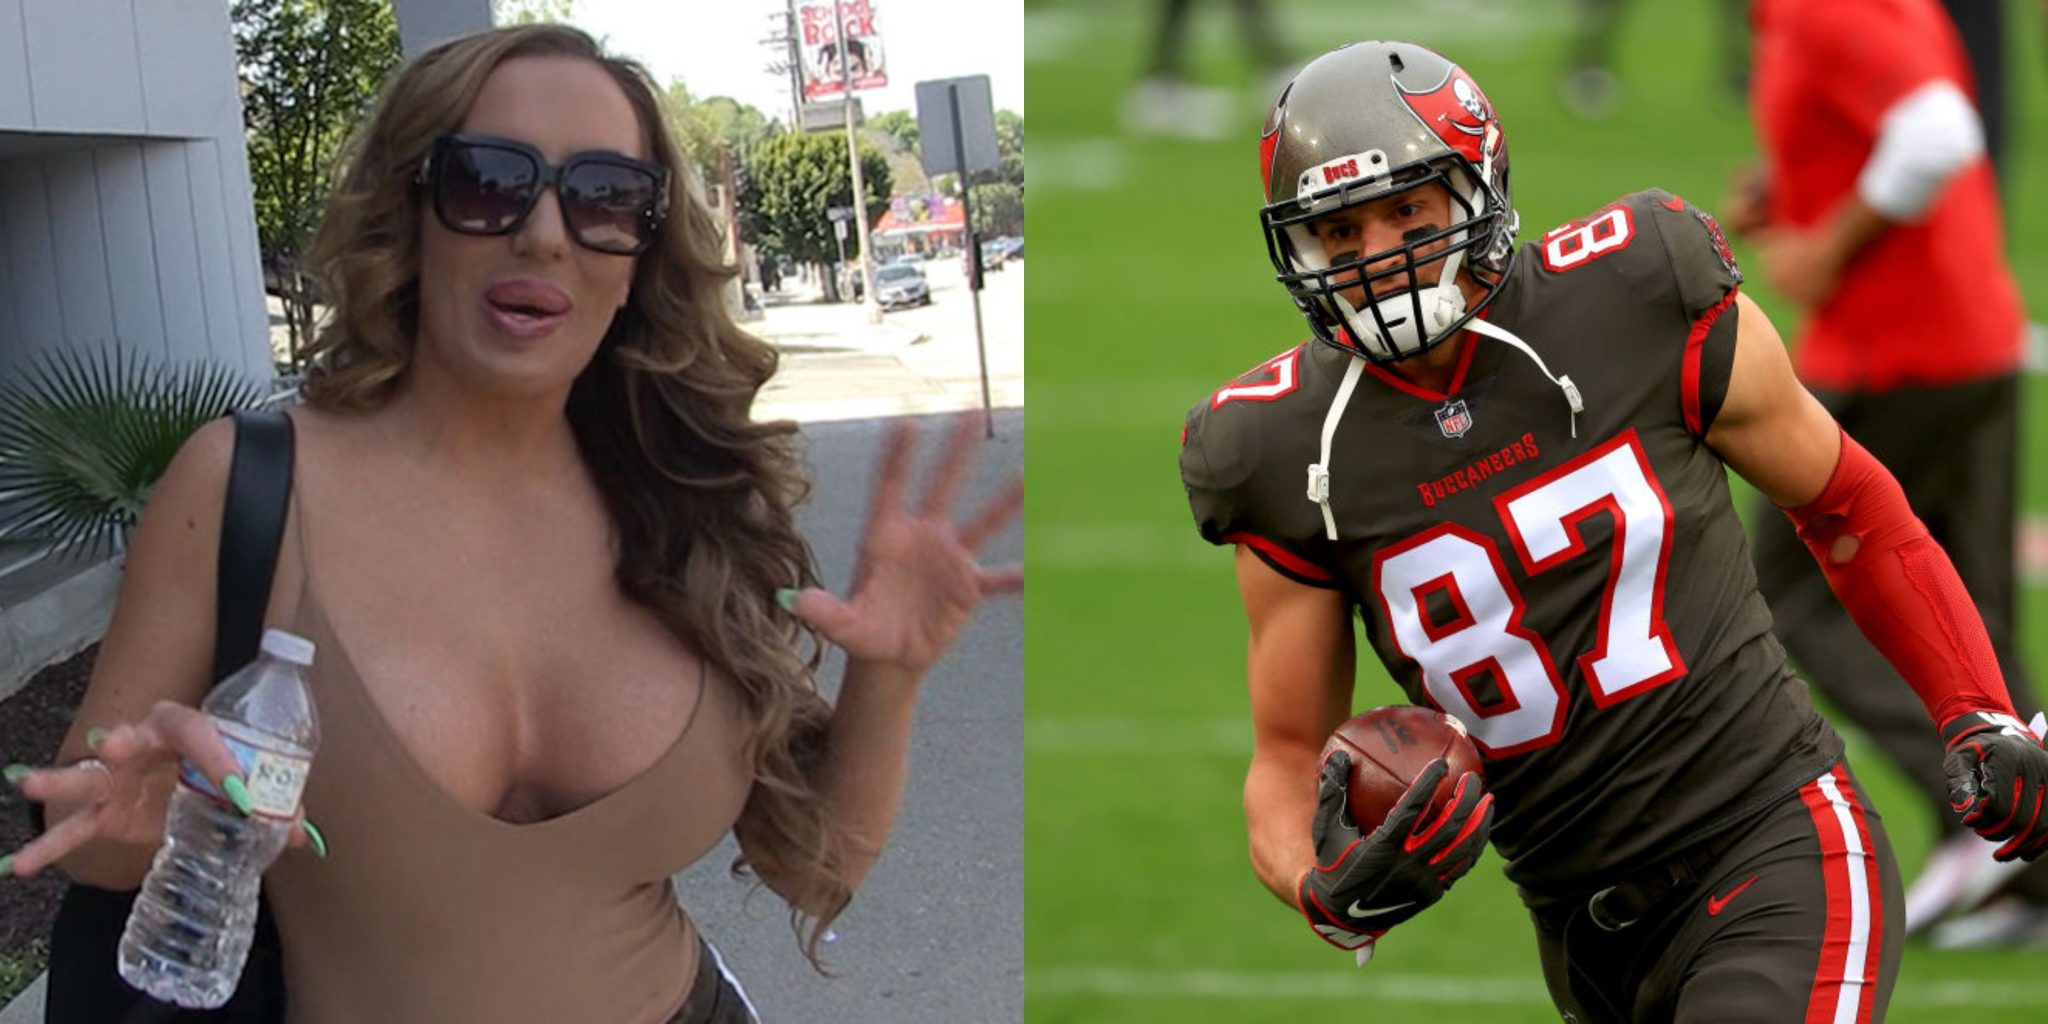 Pornstar Richelle Ryan Regrets Not Shooting Her Shot At Gronk Pic